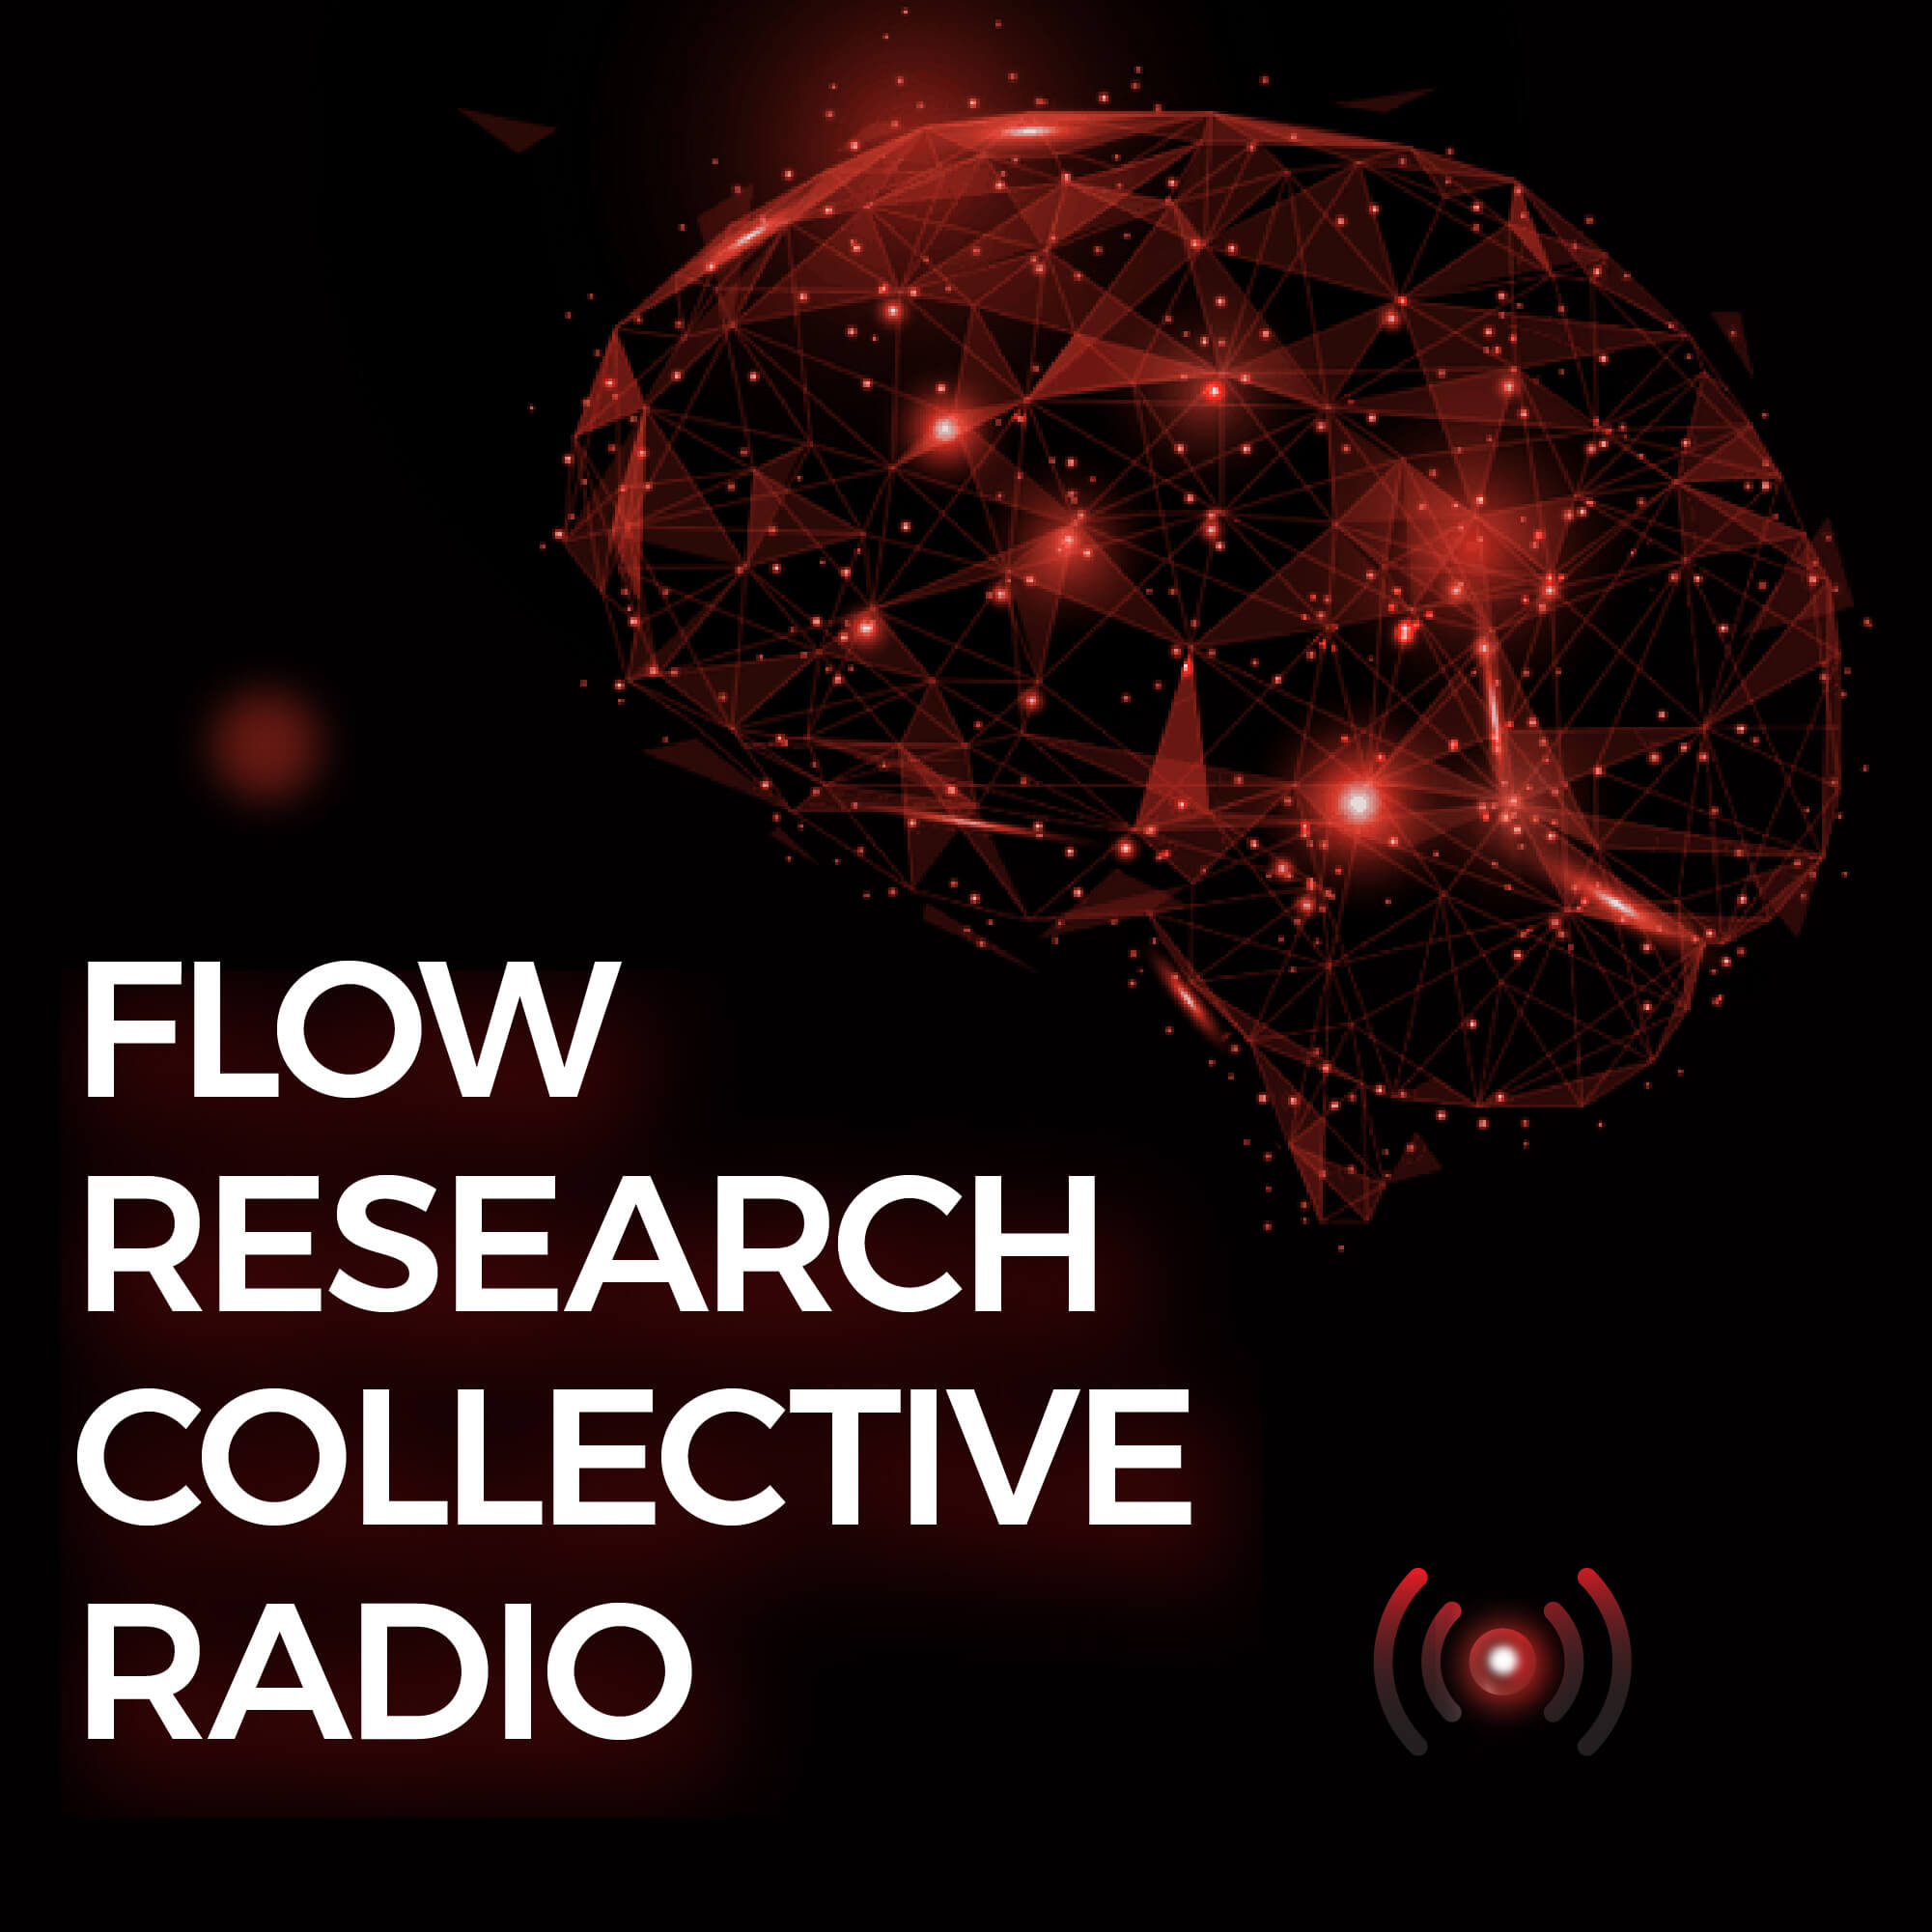 Flow Research Collective Radio